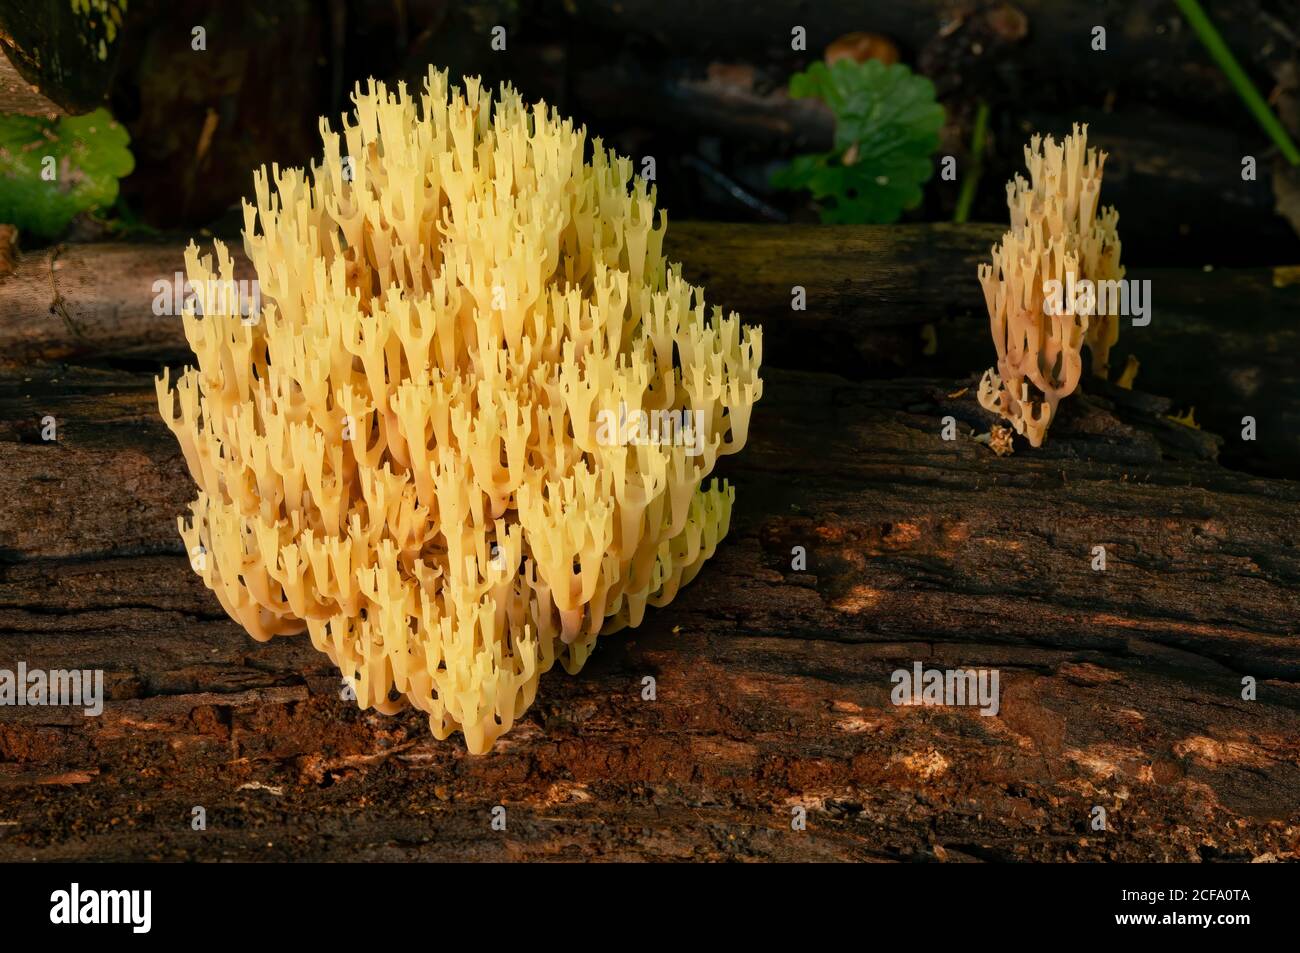 Crown-tipped coral fungus grows on a fallen log. Stock Photo